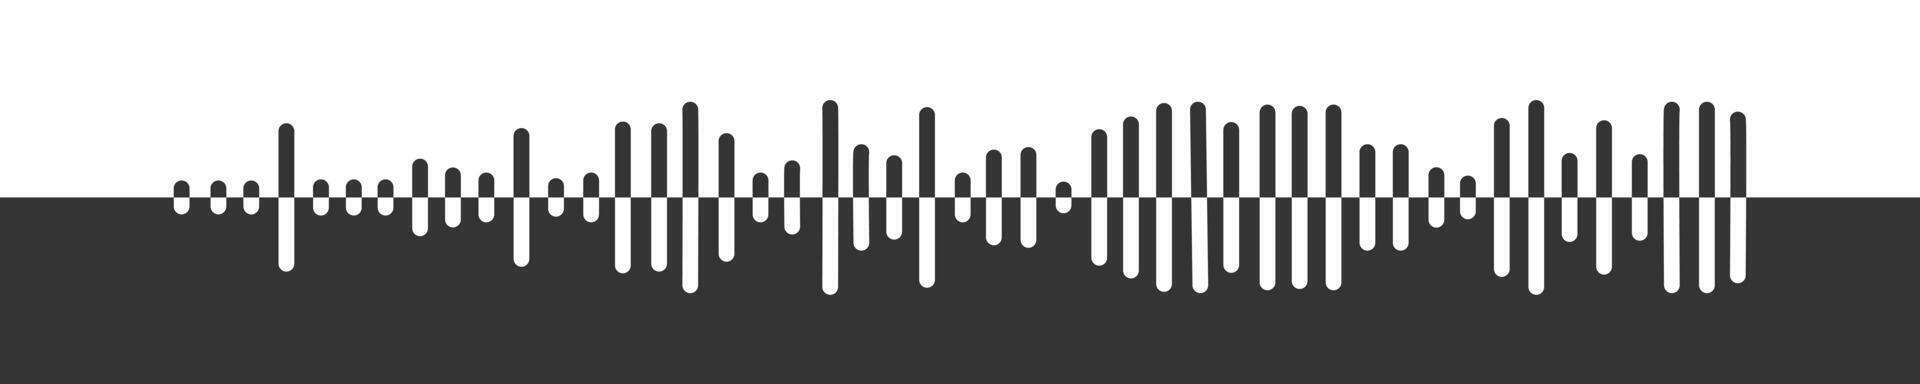 Sound wave icon. Pulse pictogram. Signal sign. Voice message, audio file symbol. Messenger, radio, podcast mobile app, media player graphic element vector